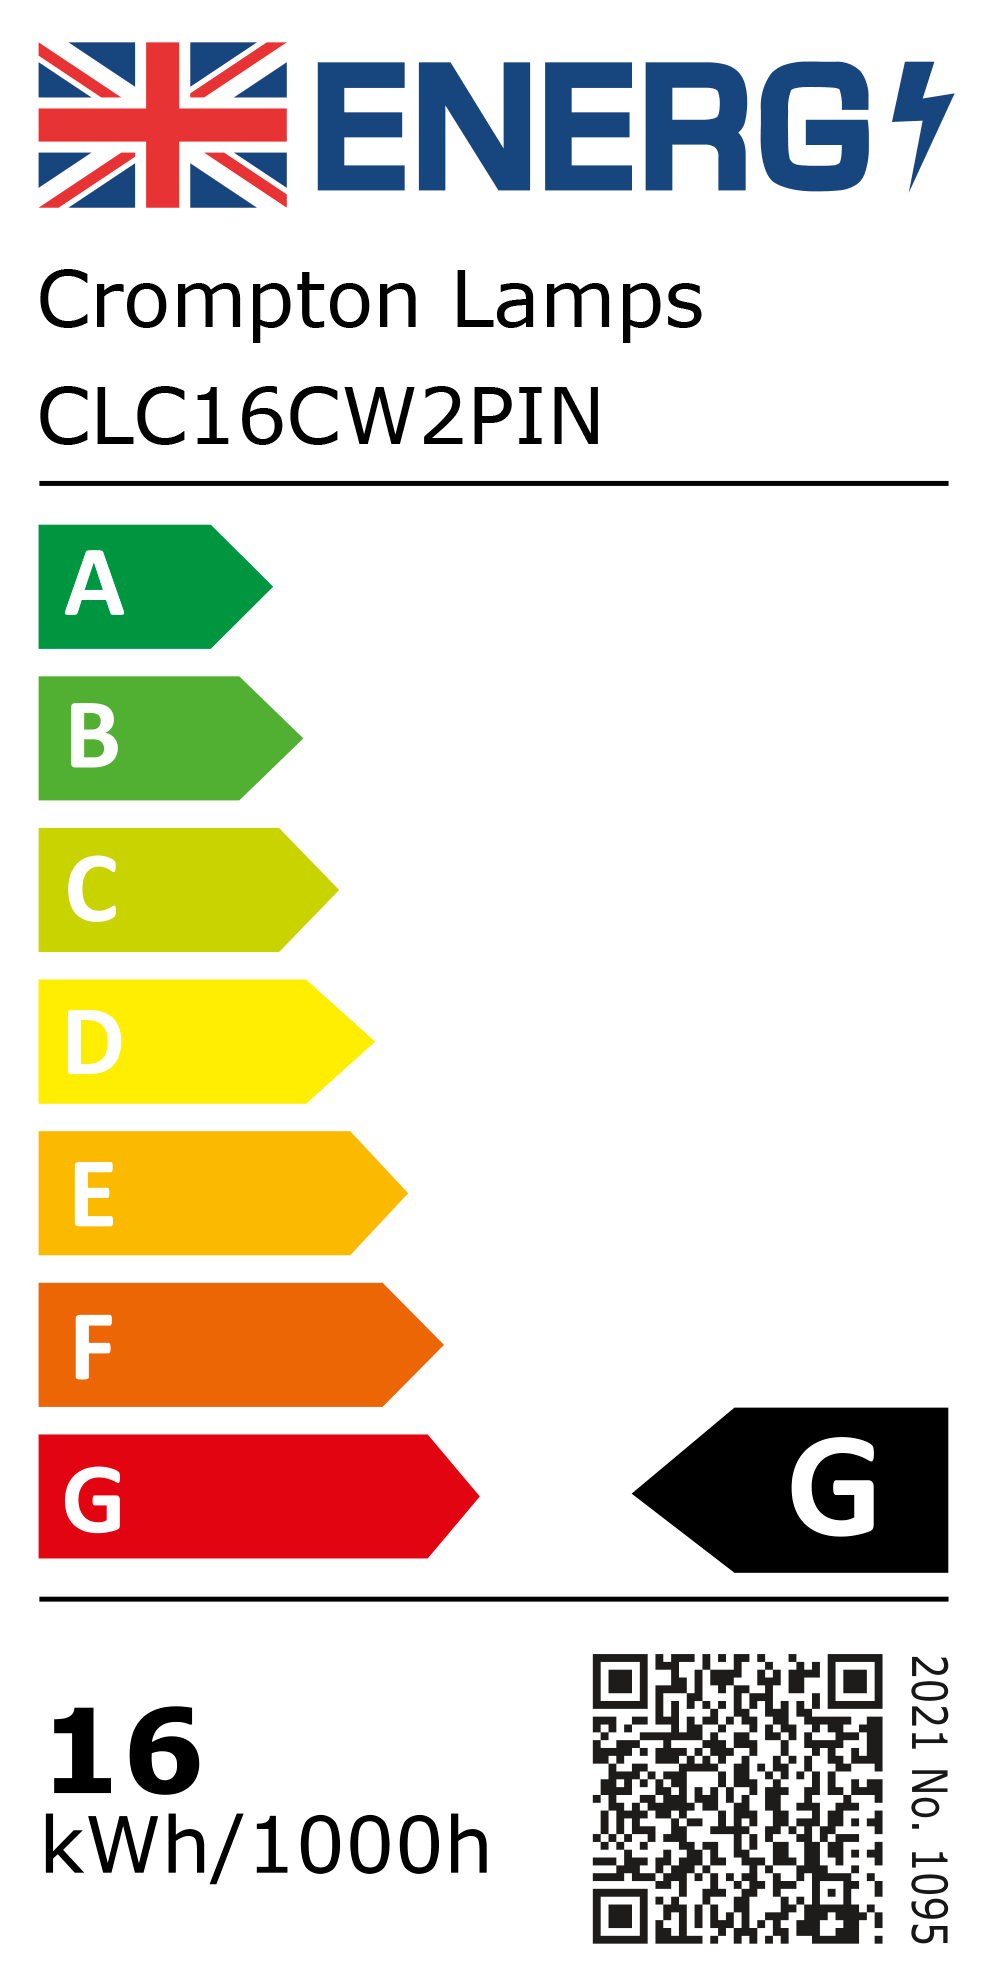 New 2021 Energy Rating Label: Stock Code CLC16CW2PIN